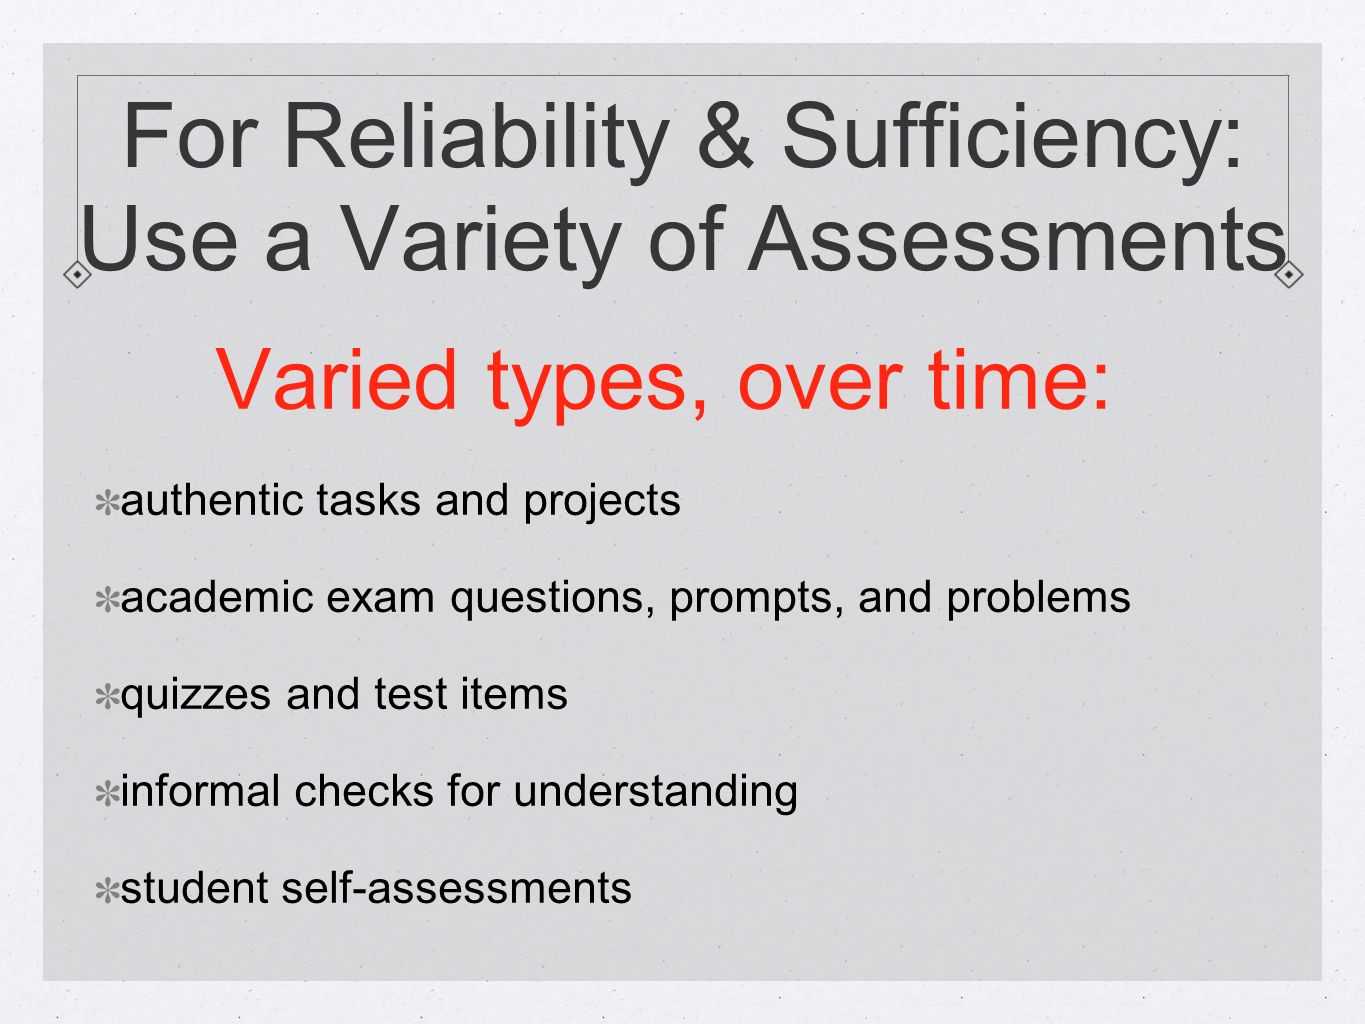 For Reliability & Sufficiency: Use a Variety of Assessments Varied types, over time: authentic tasks and projects academic exam questions, prompts, and problems quizzes and test items informal checks for understanding student self-assessments